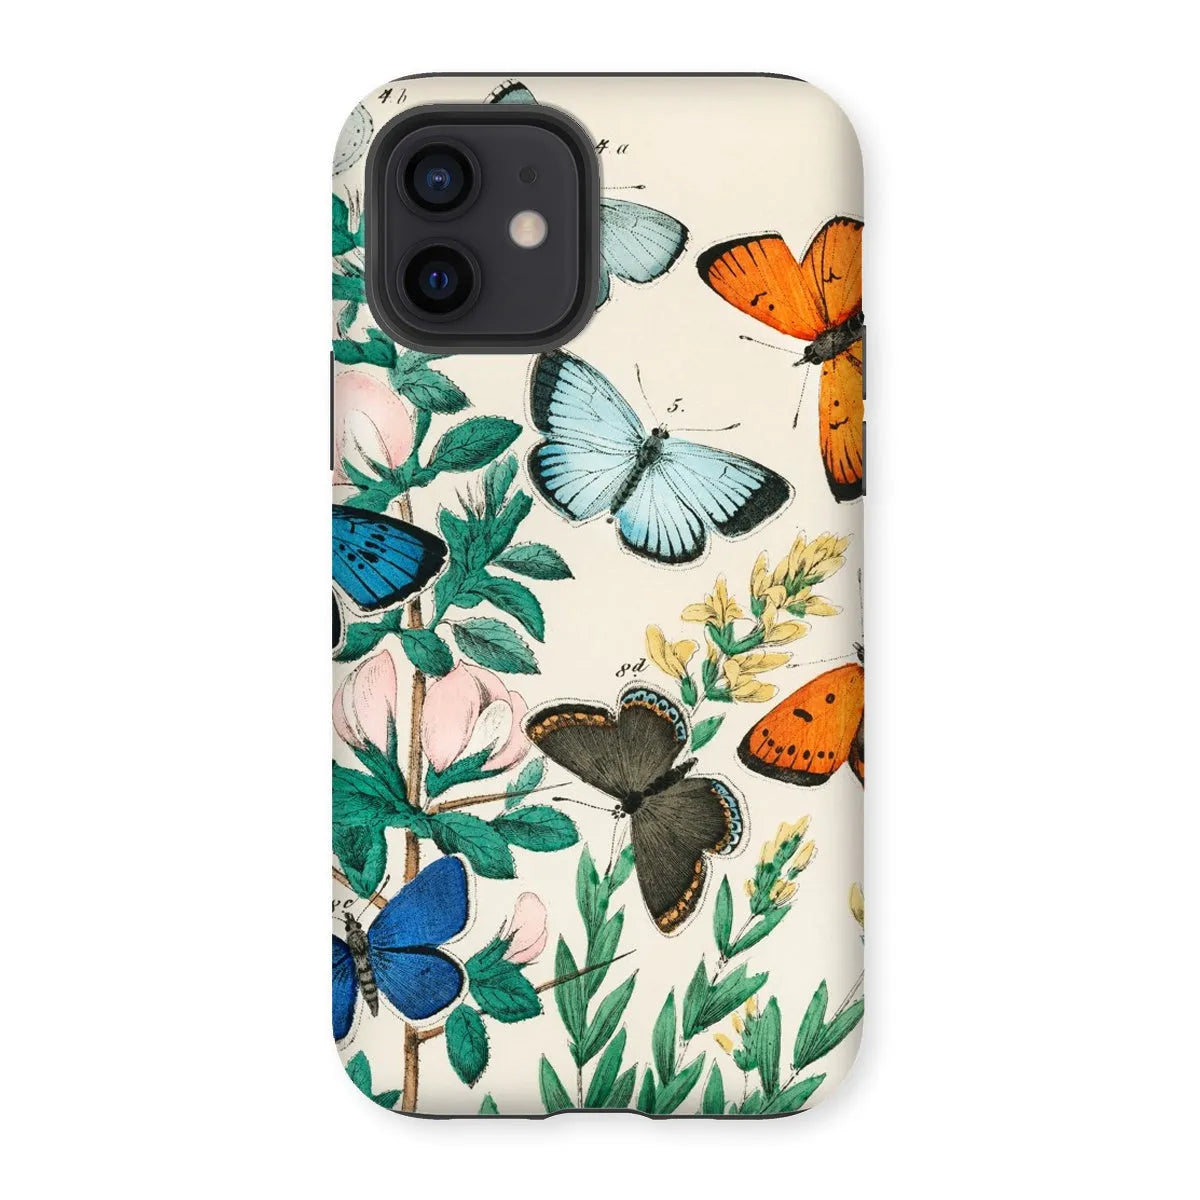 Another Butterfly Aesthetic Art Phone Case - William Forsell Kirby - Iphone 12 / Matte - Mobile Phone Cases - Aesthetic